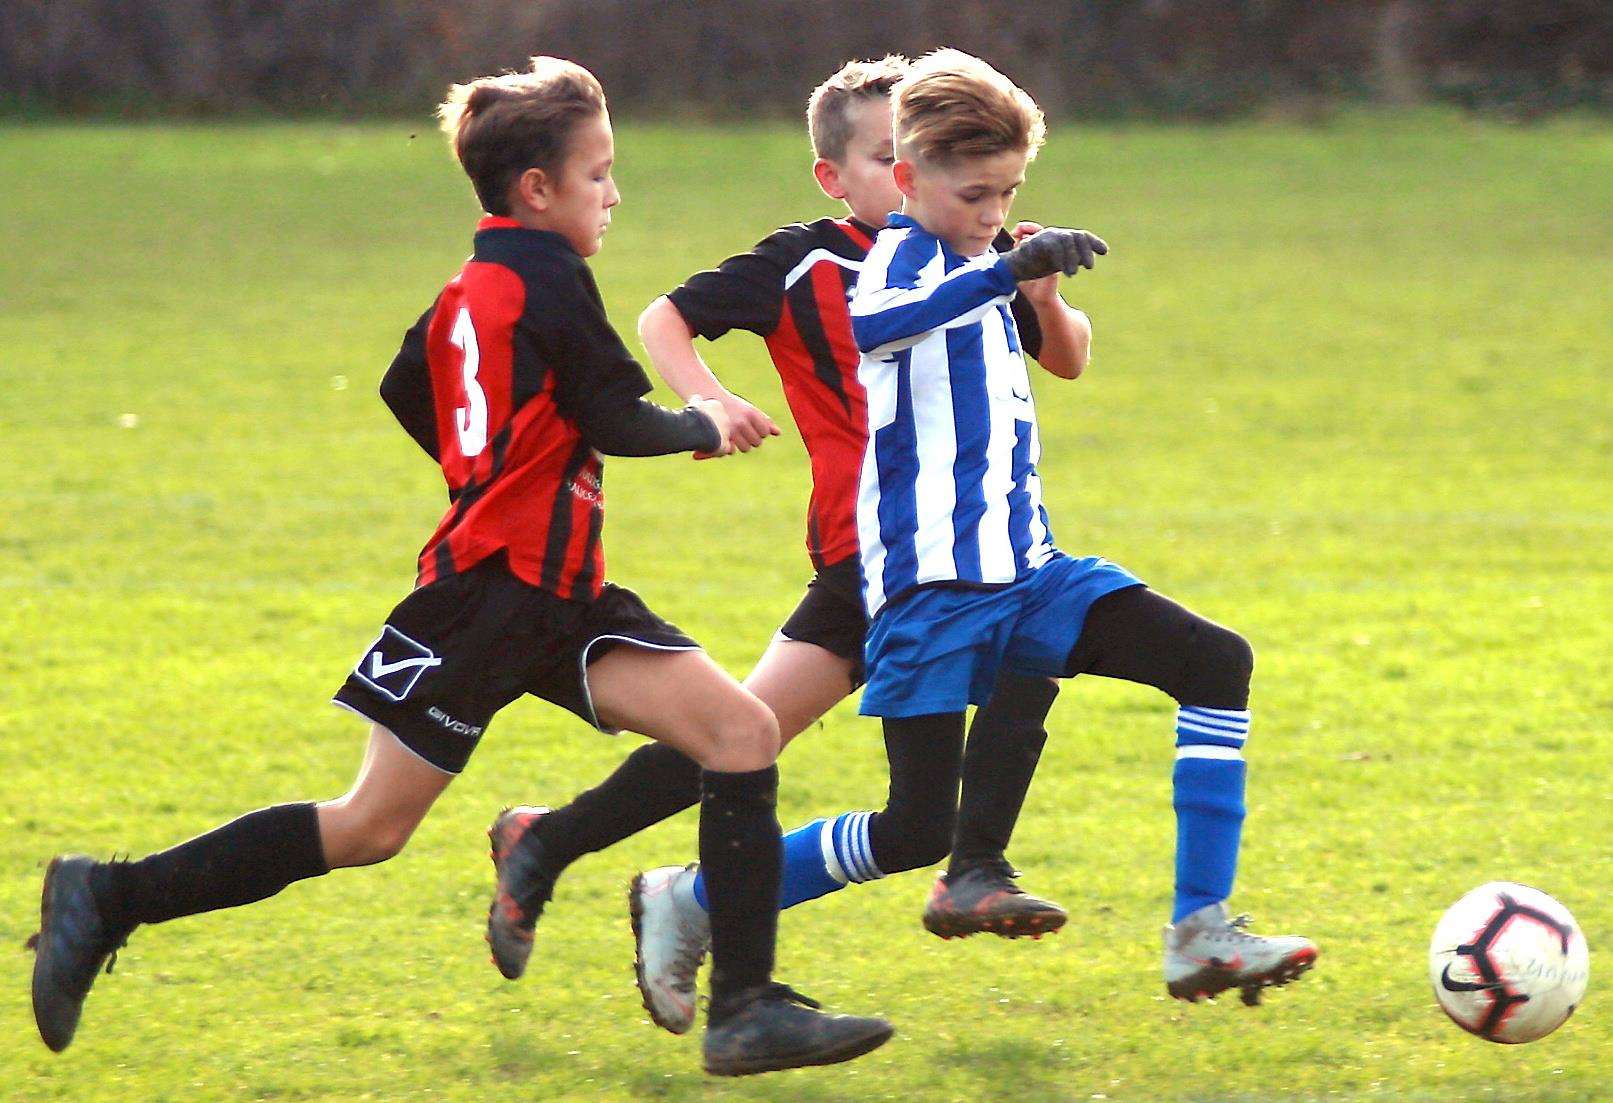 Woodcoombe Youth and Chatham Riverside clash in Under-12 Division 3 Picture: Phil Lee